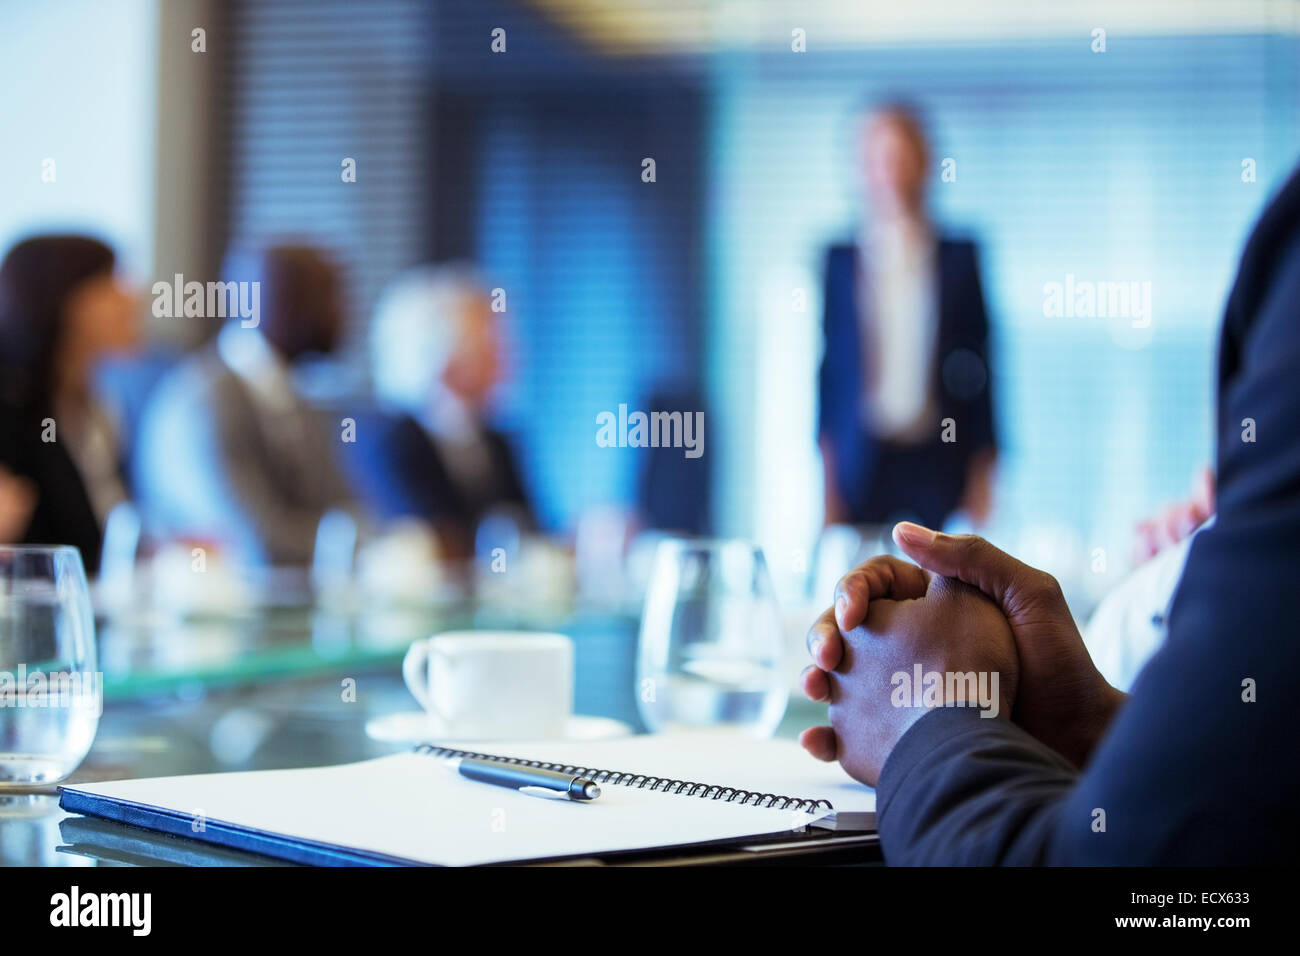 Businessman sitting at conference table in conference room with hands clasped Stock Photo